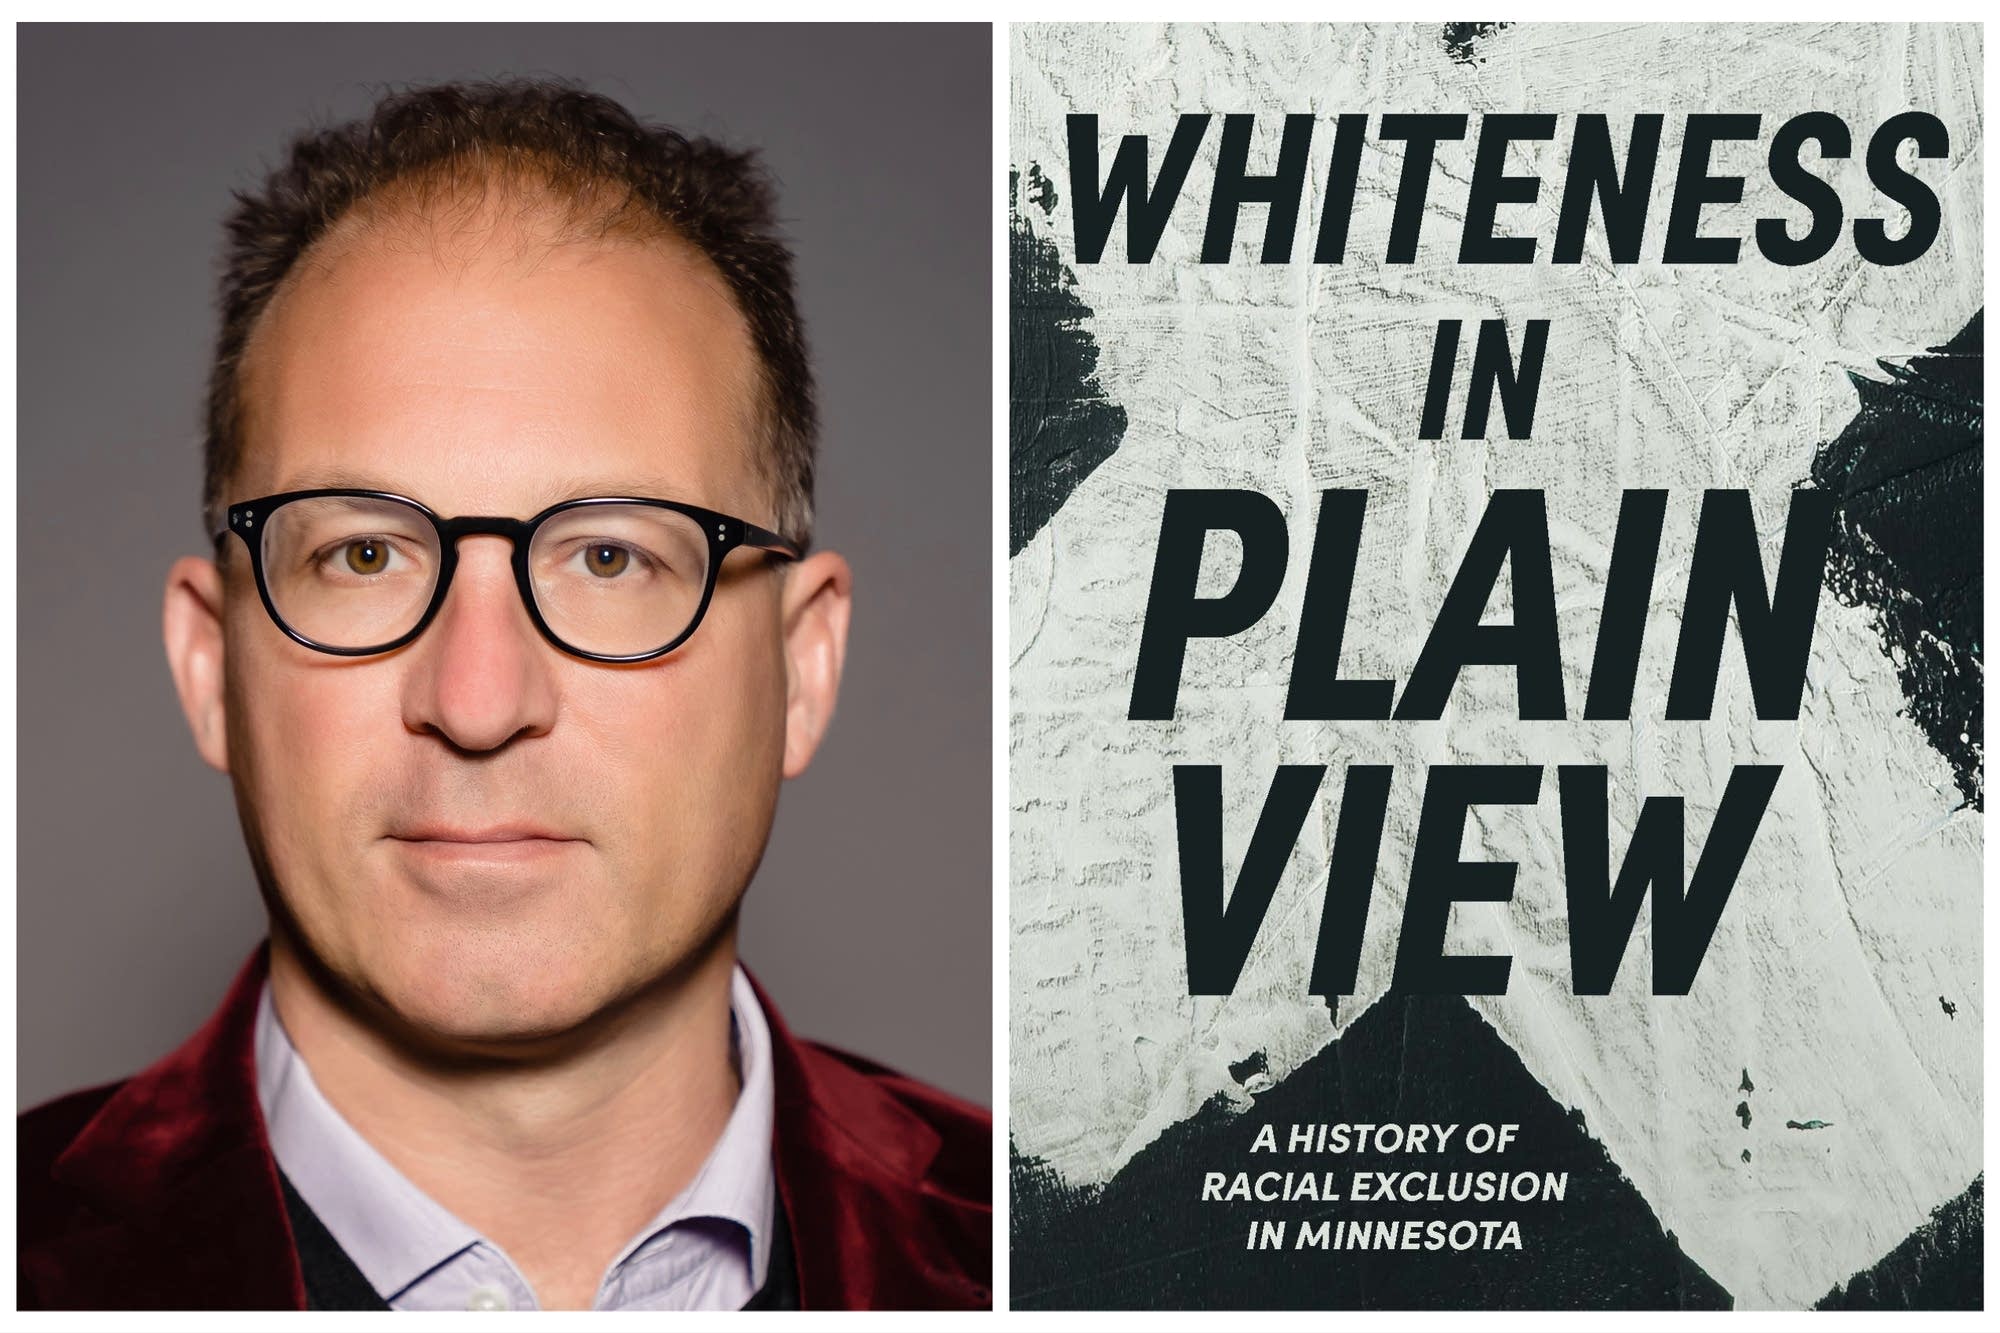 Author Chad Montrie and "Whiteness in Plain View" book cover